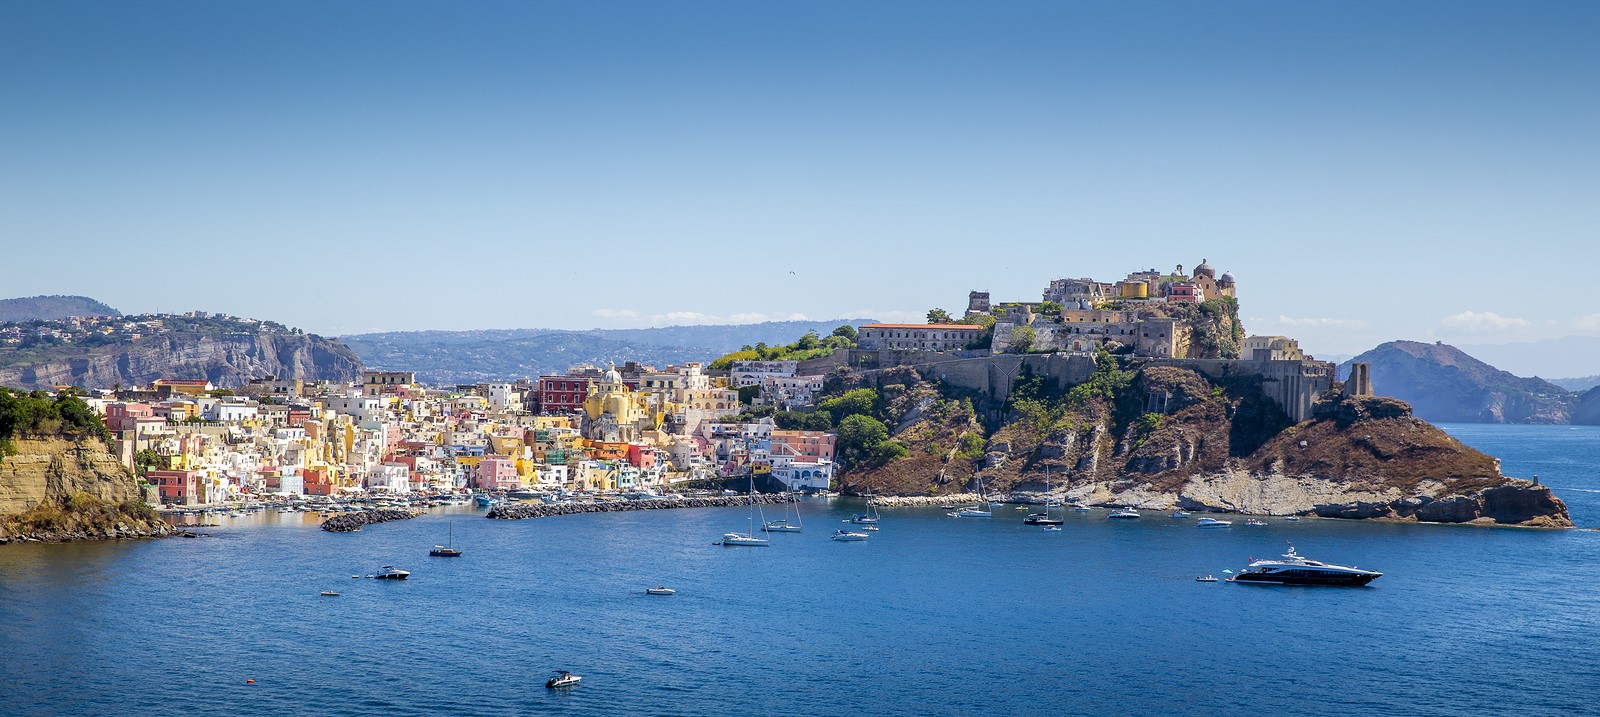 Panorama of Procida Island with view on Corricella village, Italy